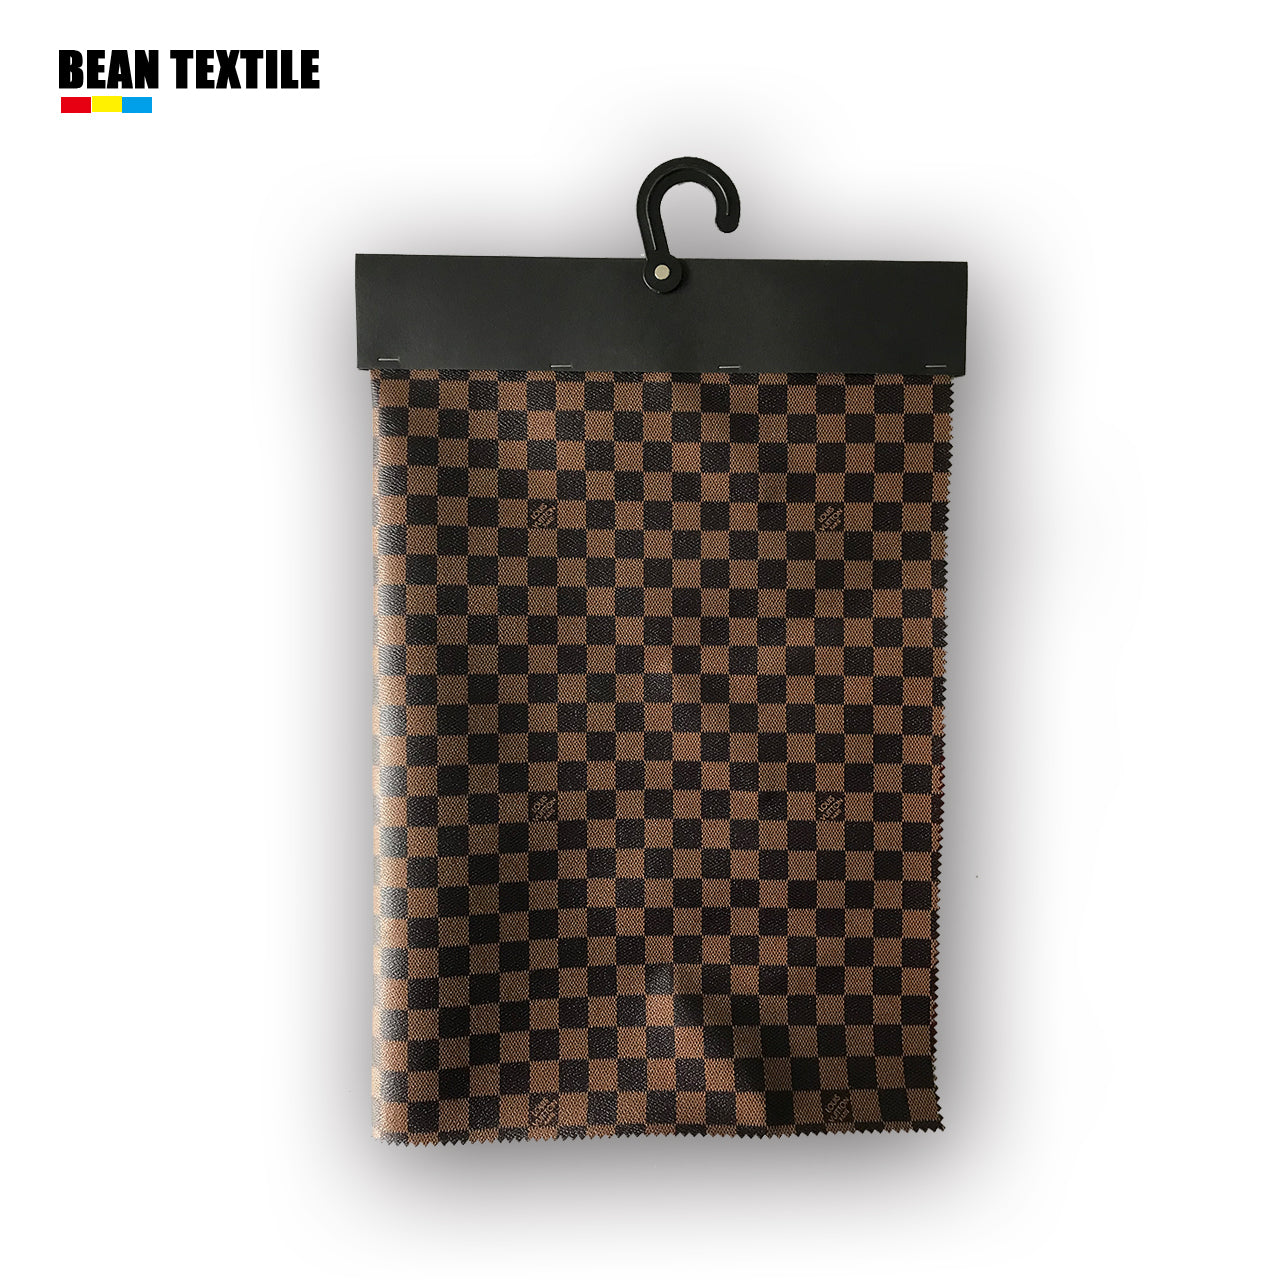 Crafted Classic Brown LV Vinyl Leather Fabric For Sale